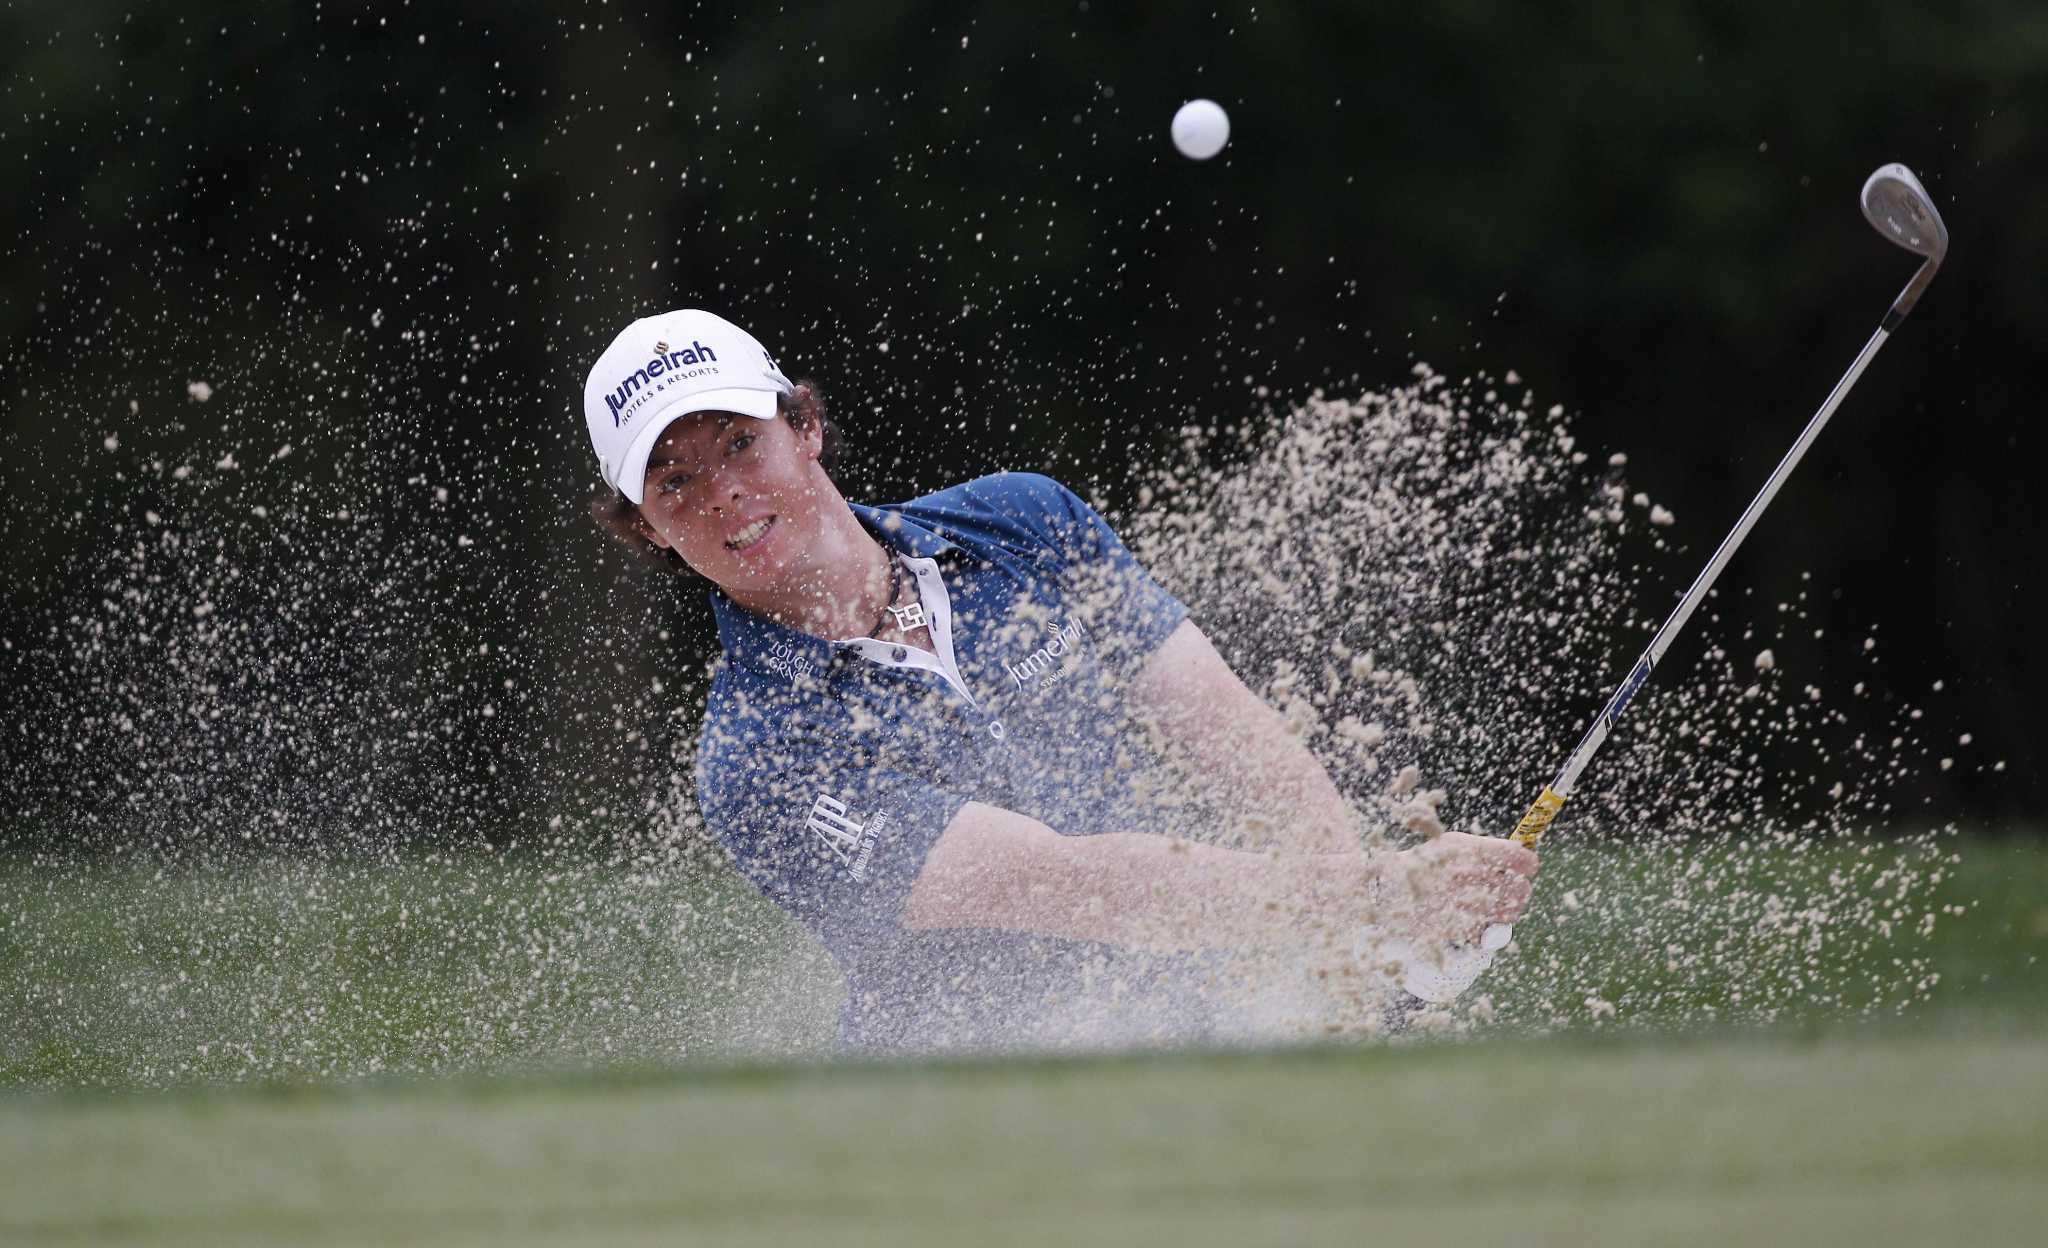 Rory McIlroy leads US Open field after day one; Y.E Yang, Charl